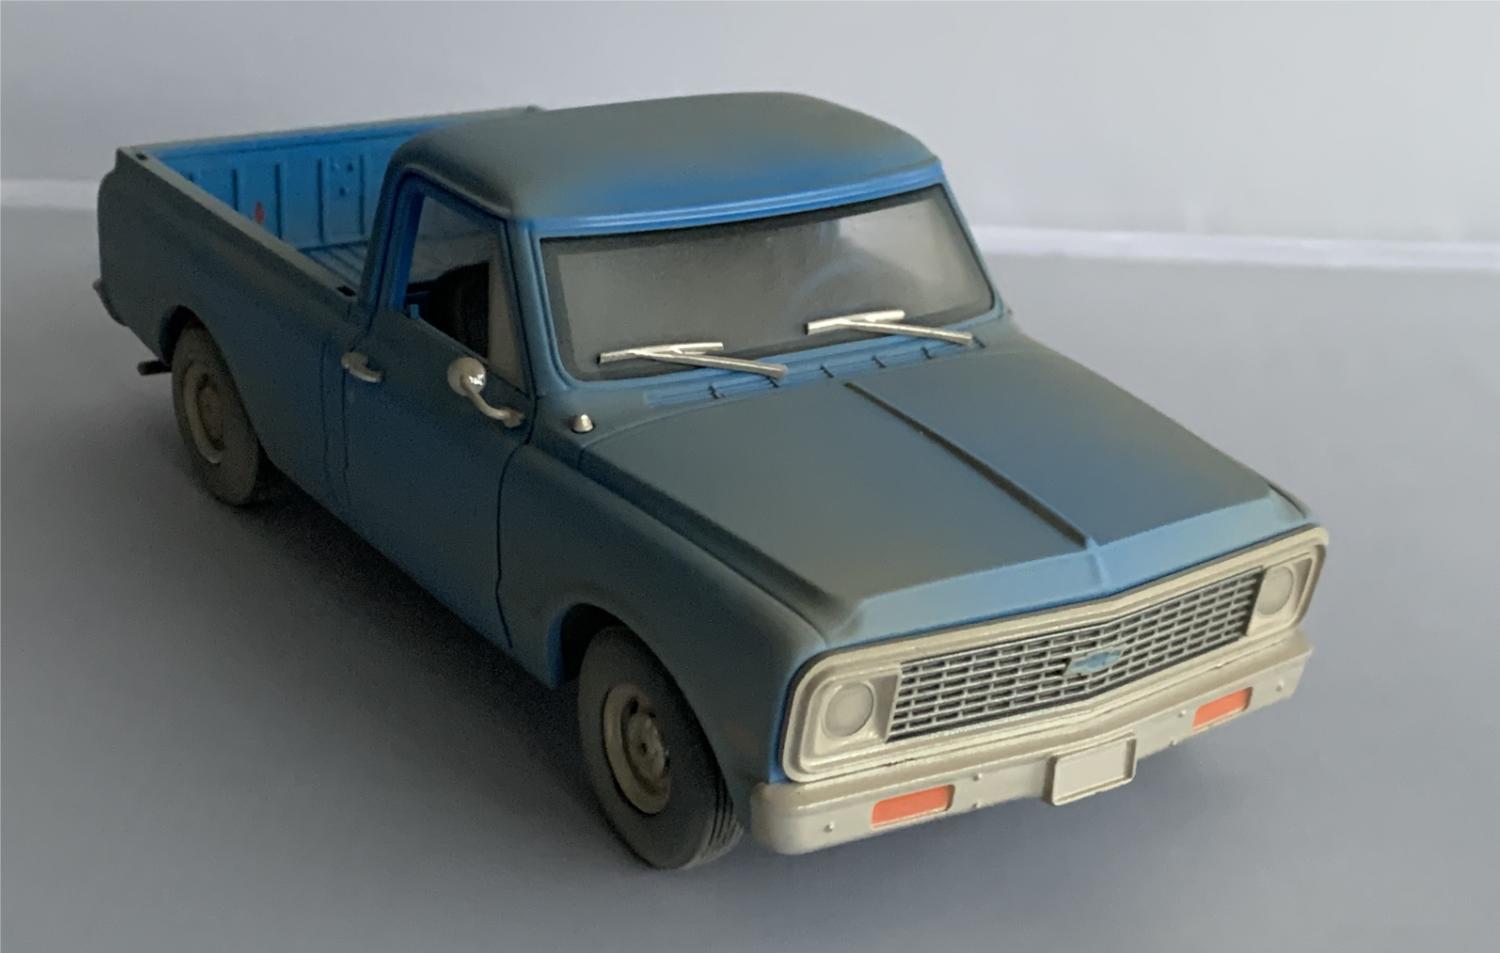 From the 1974 American horror film which followed a group of friends who fall victim to a family of cannibals while on their way to visit an old homestead.  The model shown here is a very good representation of Chevrolet C10 decorated in light blue with a dusty finish,